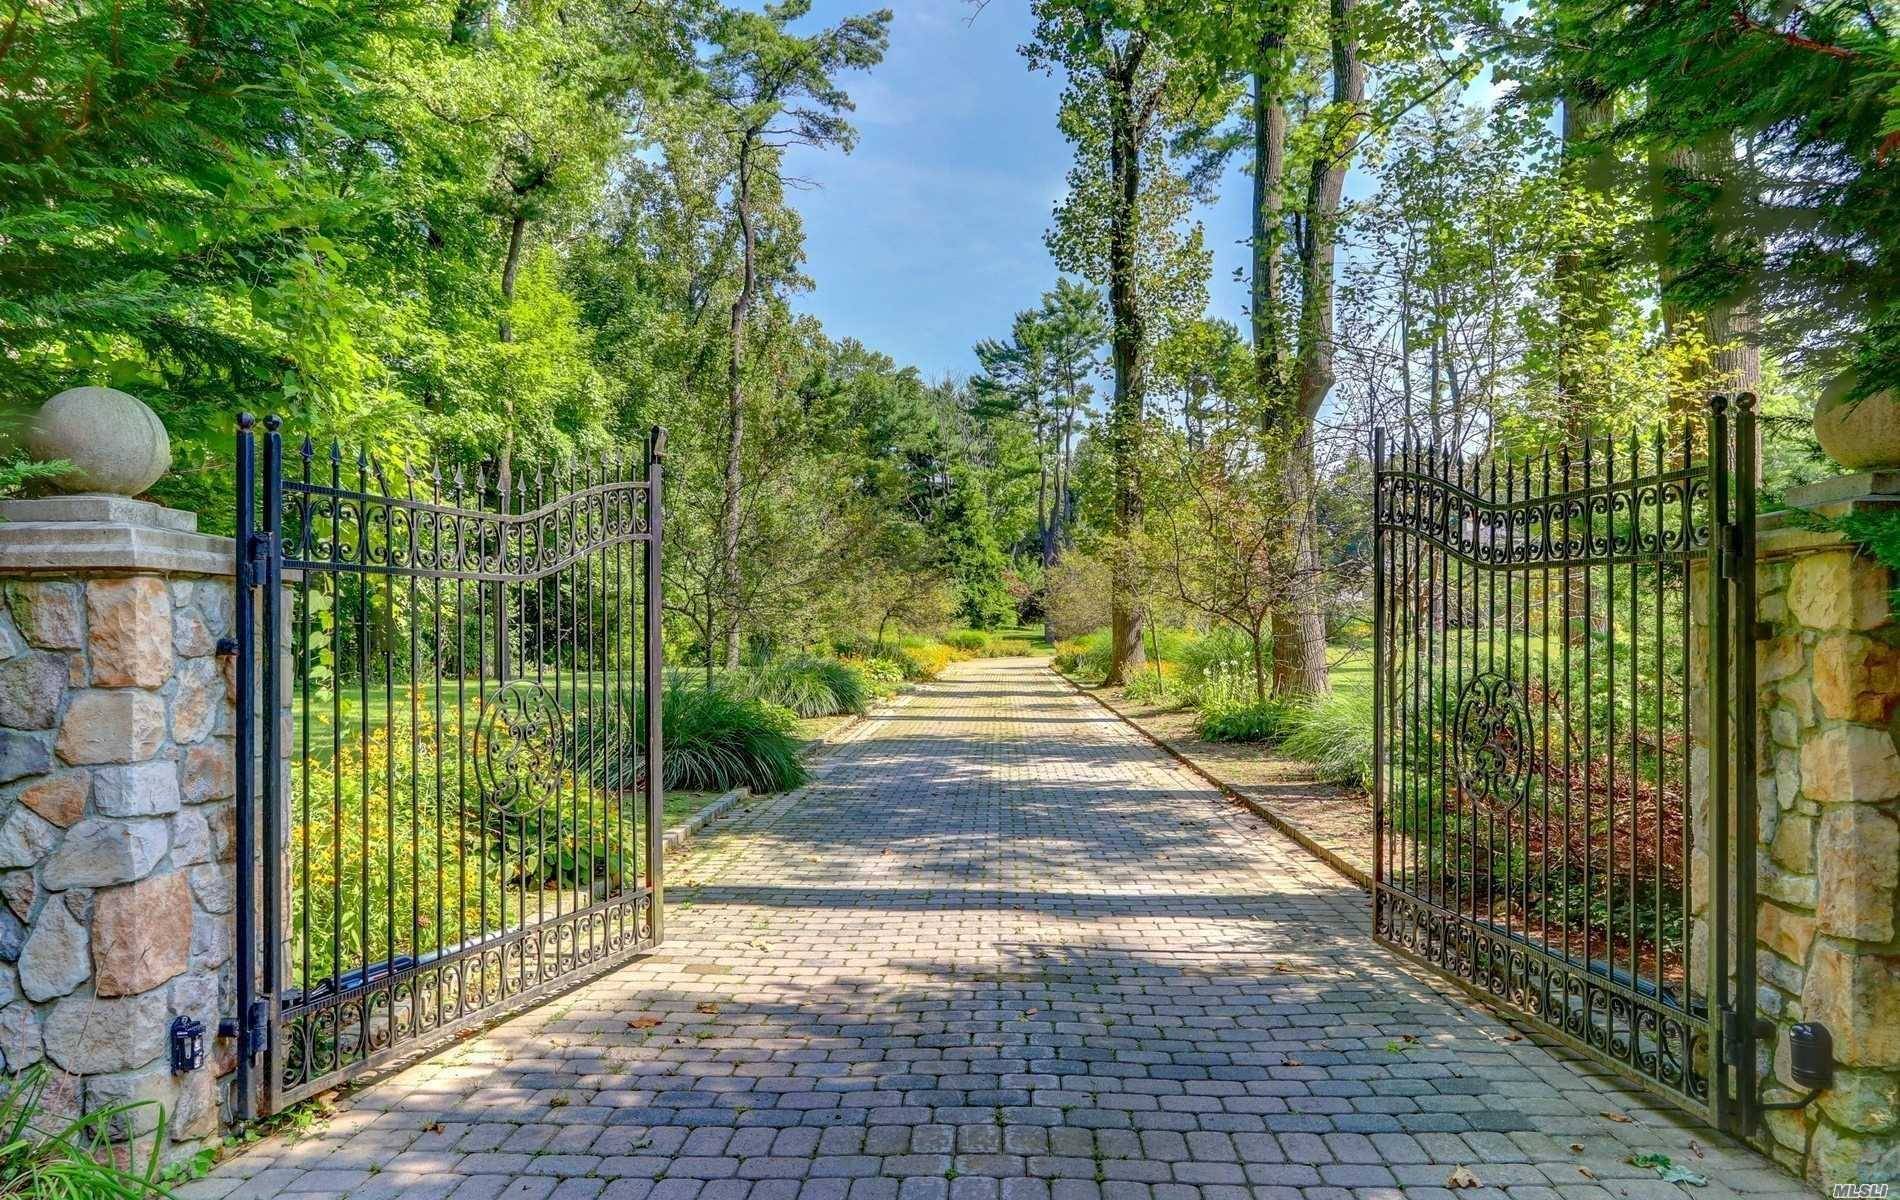 Set Behind Gated Entry on 4 quiet acres w IG Pool, this Magnificent 9yr old Estate Offers Unparalleled Luxury, Spacious Formal Rms w Fireplaces, w Fabulous Chef's Kitchen opens to ...